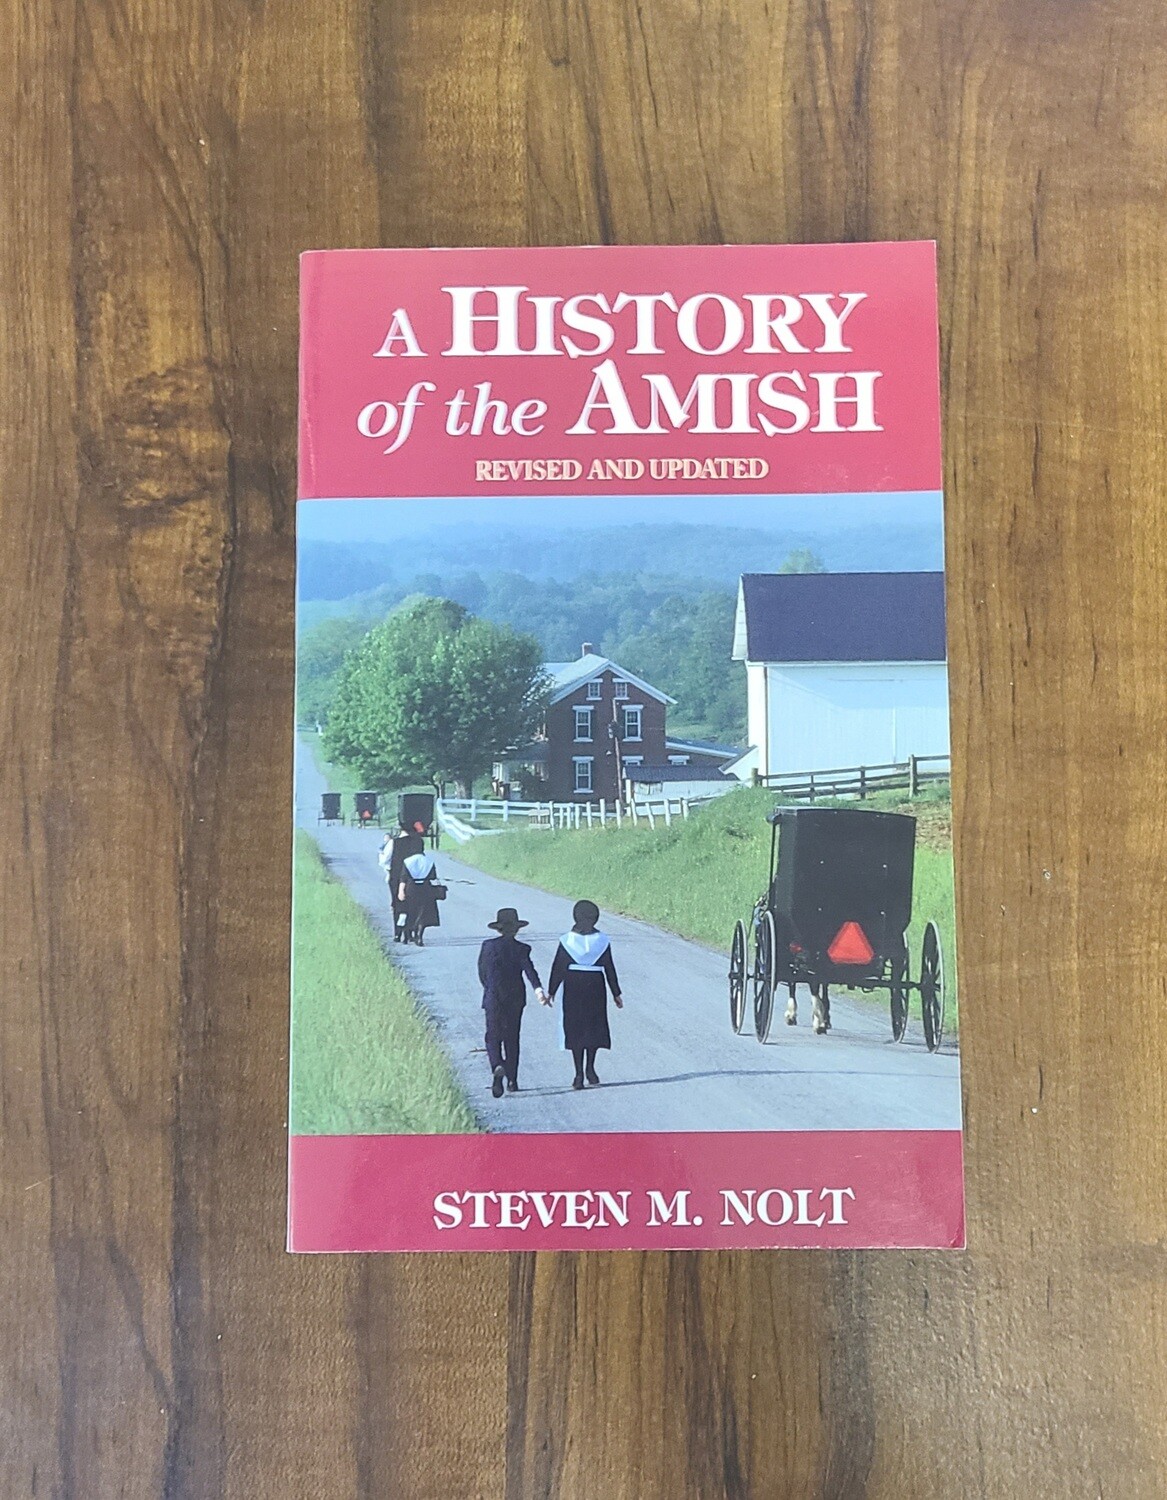 A History of the Amish by Steven M. Nolt